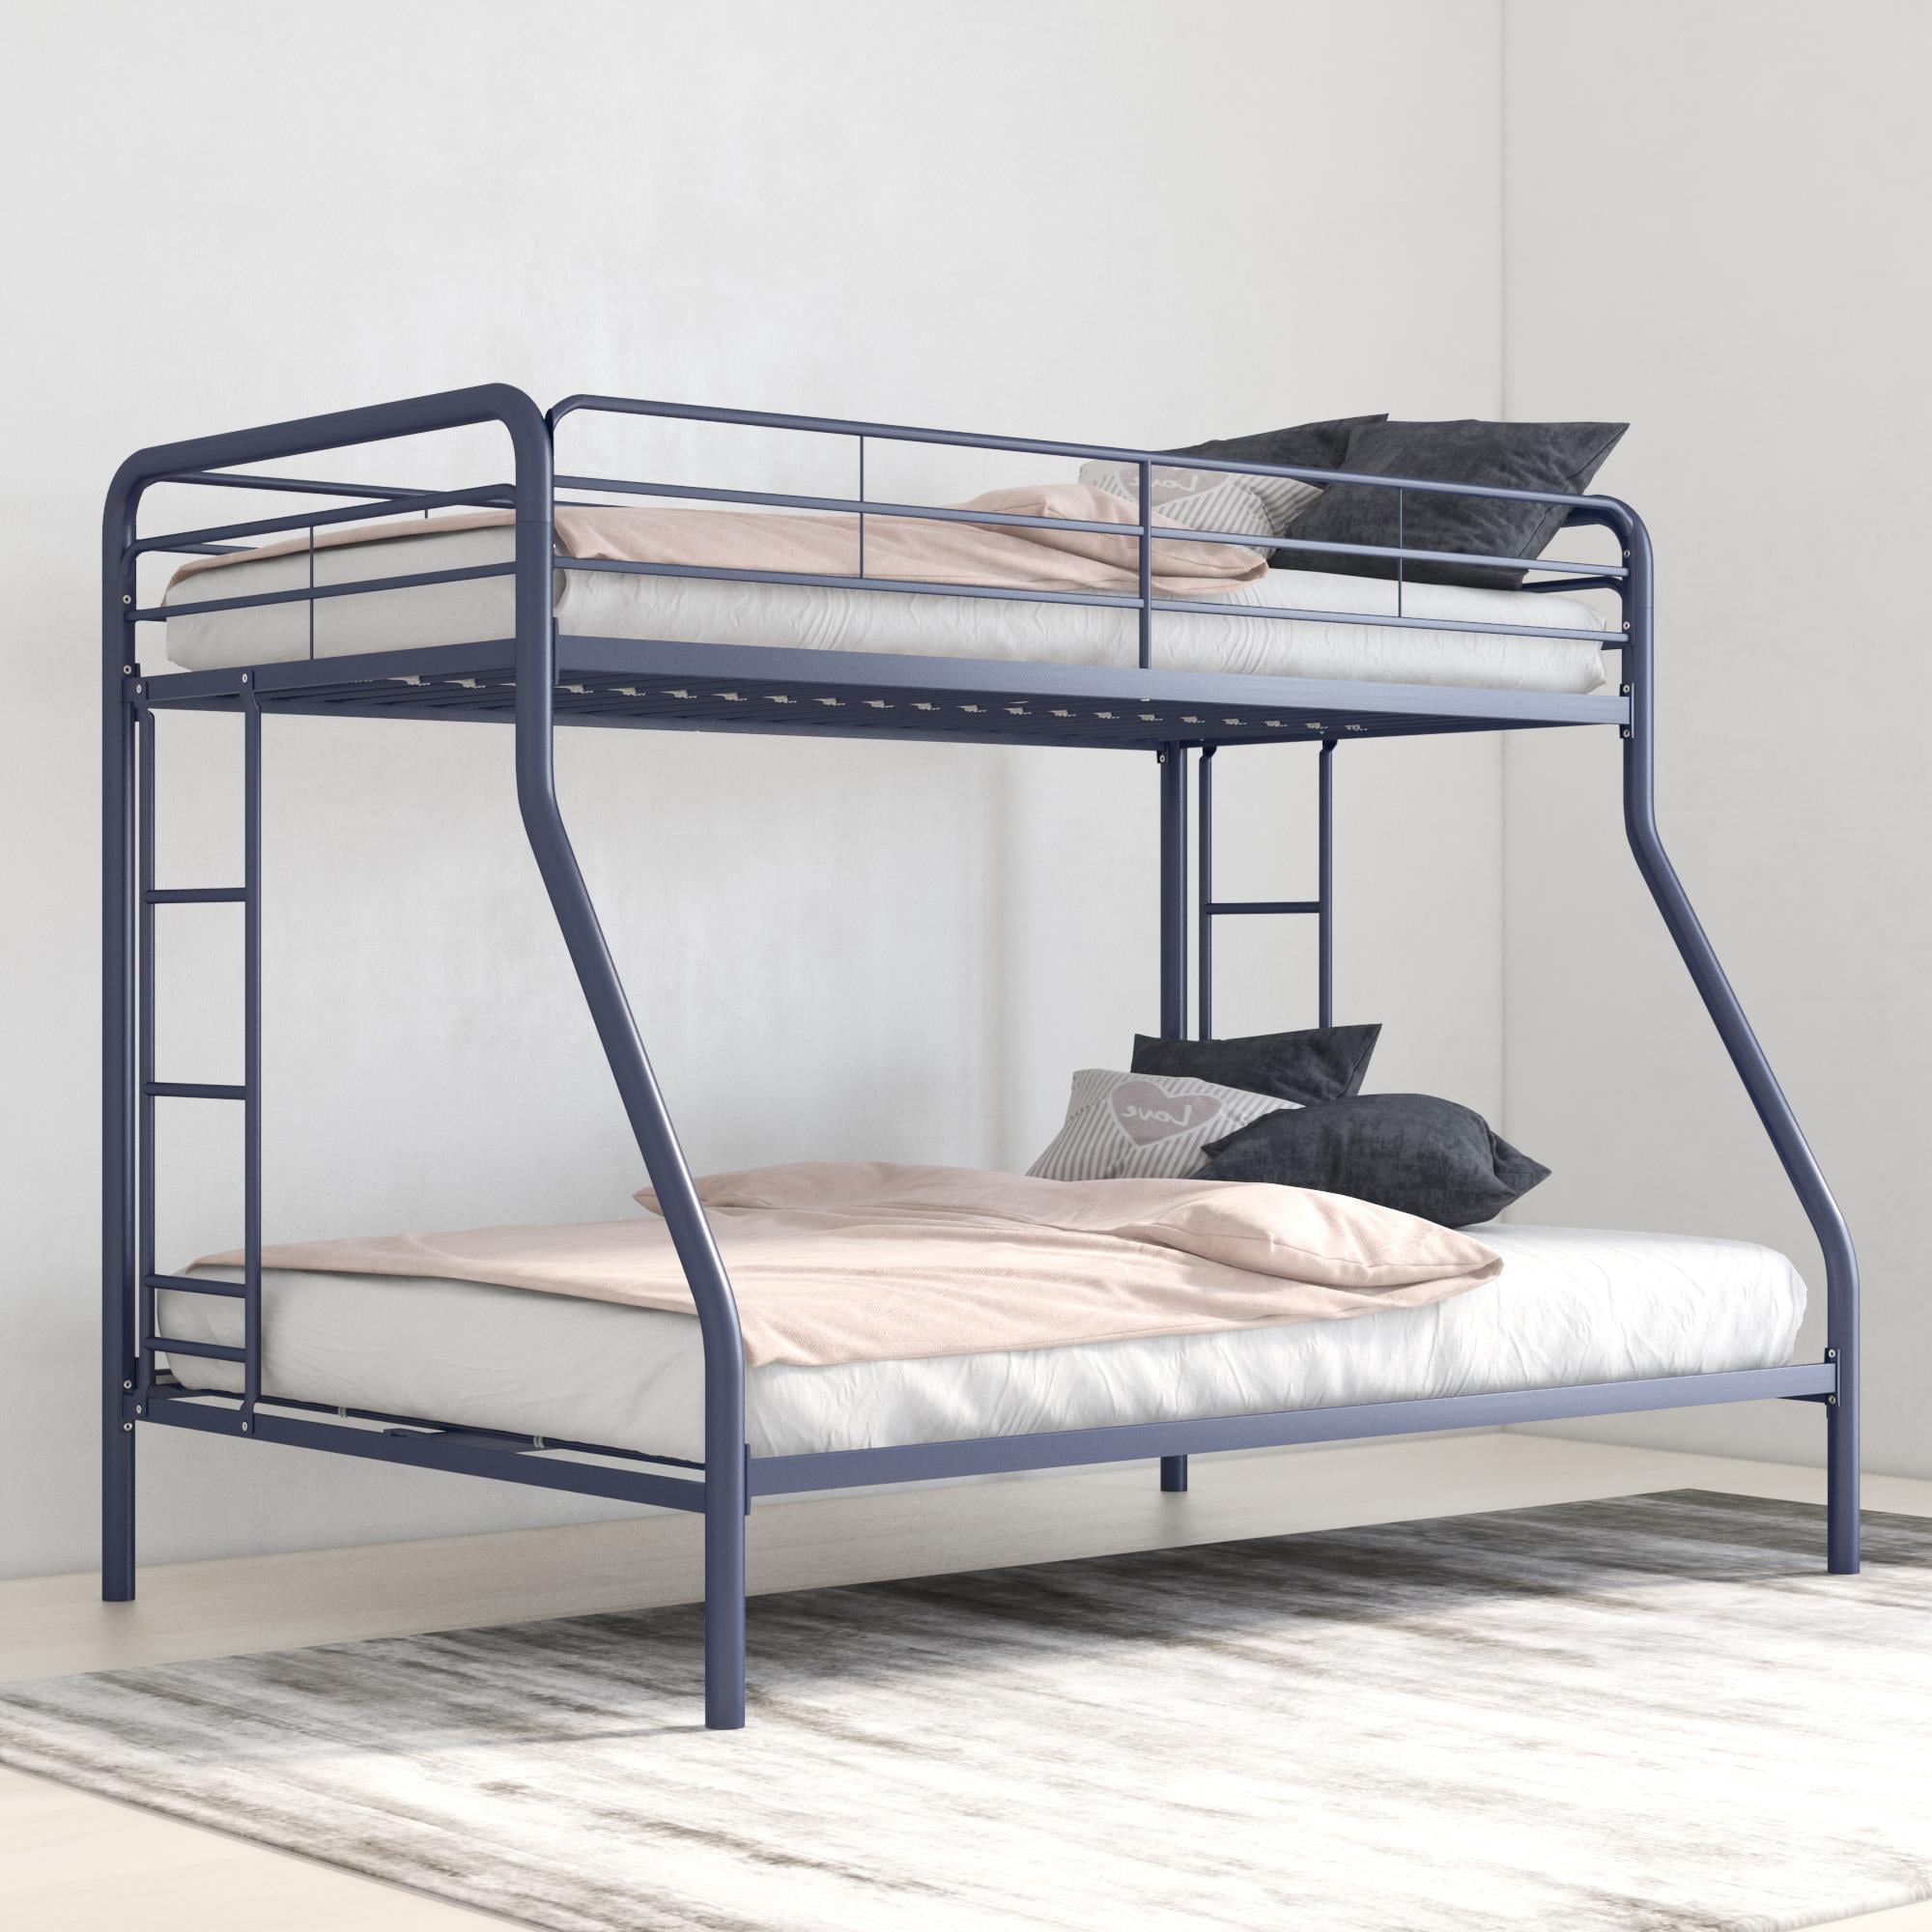 Dhp Twin Over Full Metal Bunk Bed Frame, Dorel Twin Loft Bed